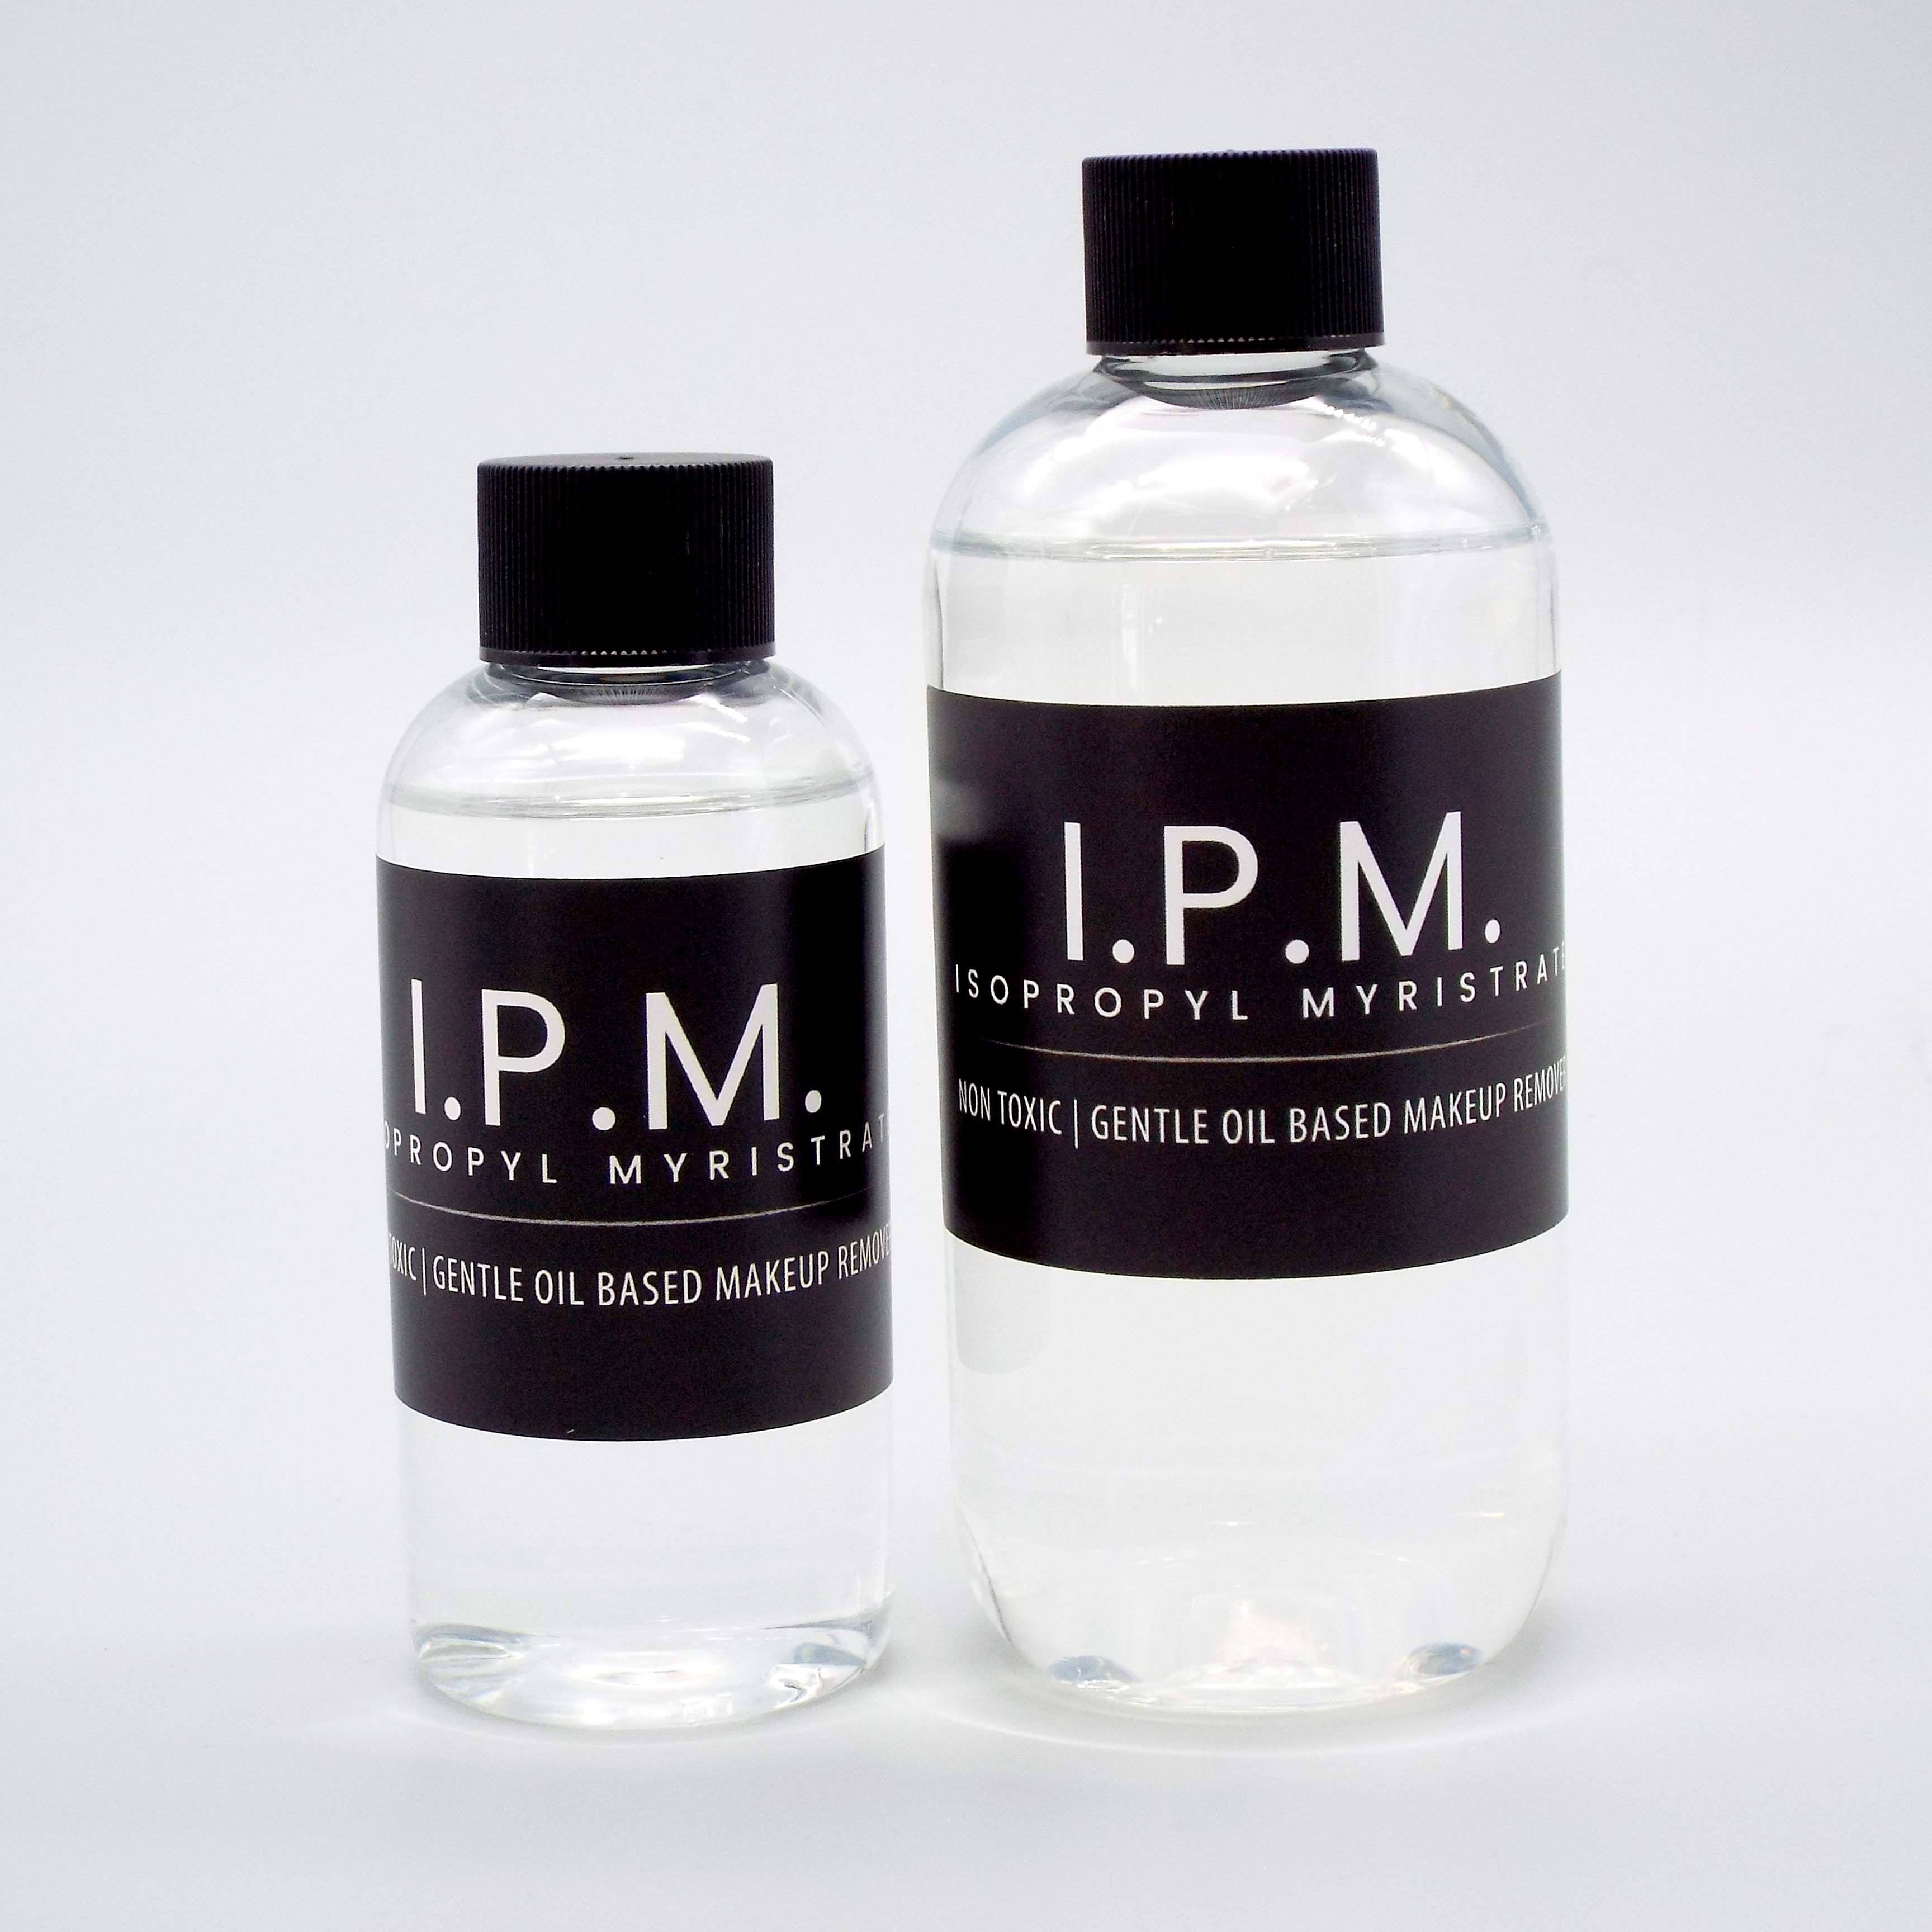 Isopropyl Myristate IPM - Makeup and Adhesive remover - Stage and